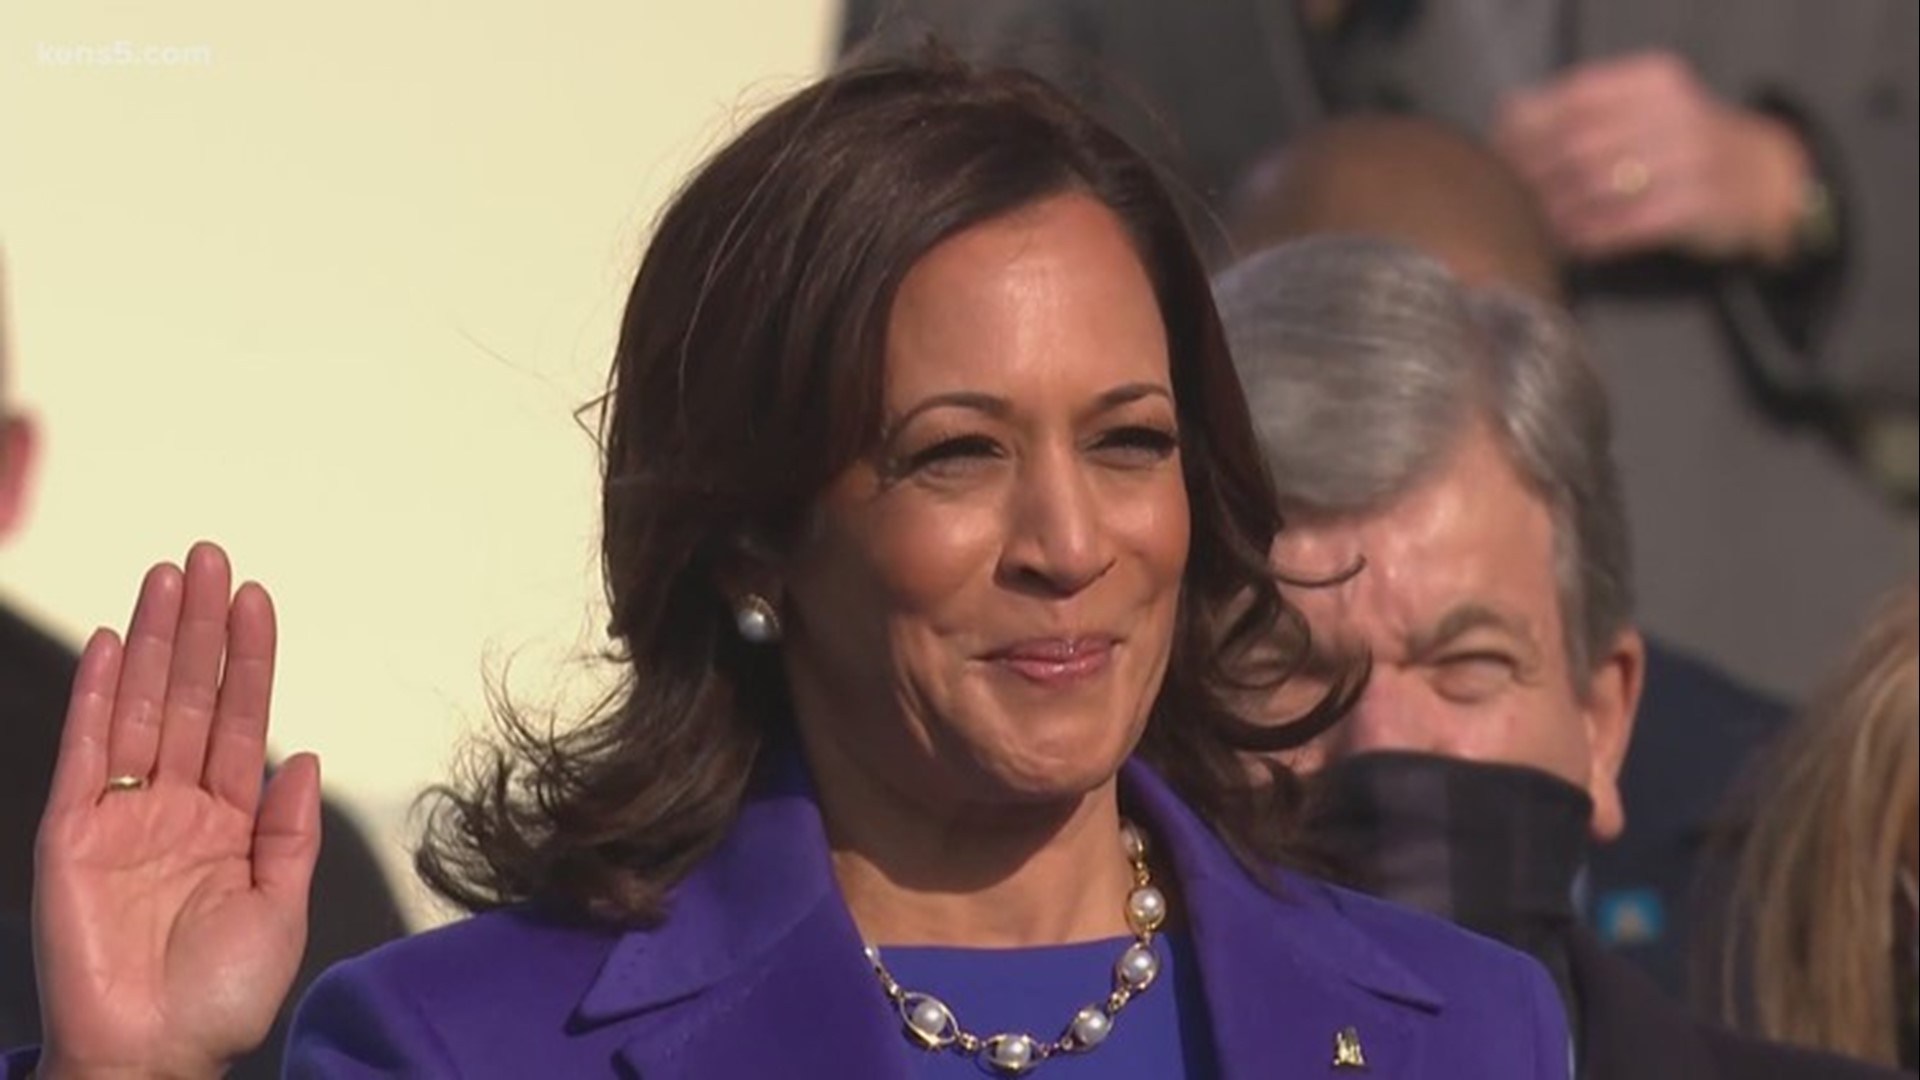 Kamala Harris became the first woman of color to take the oath for the office of the Vice President.